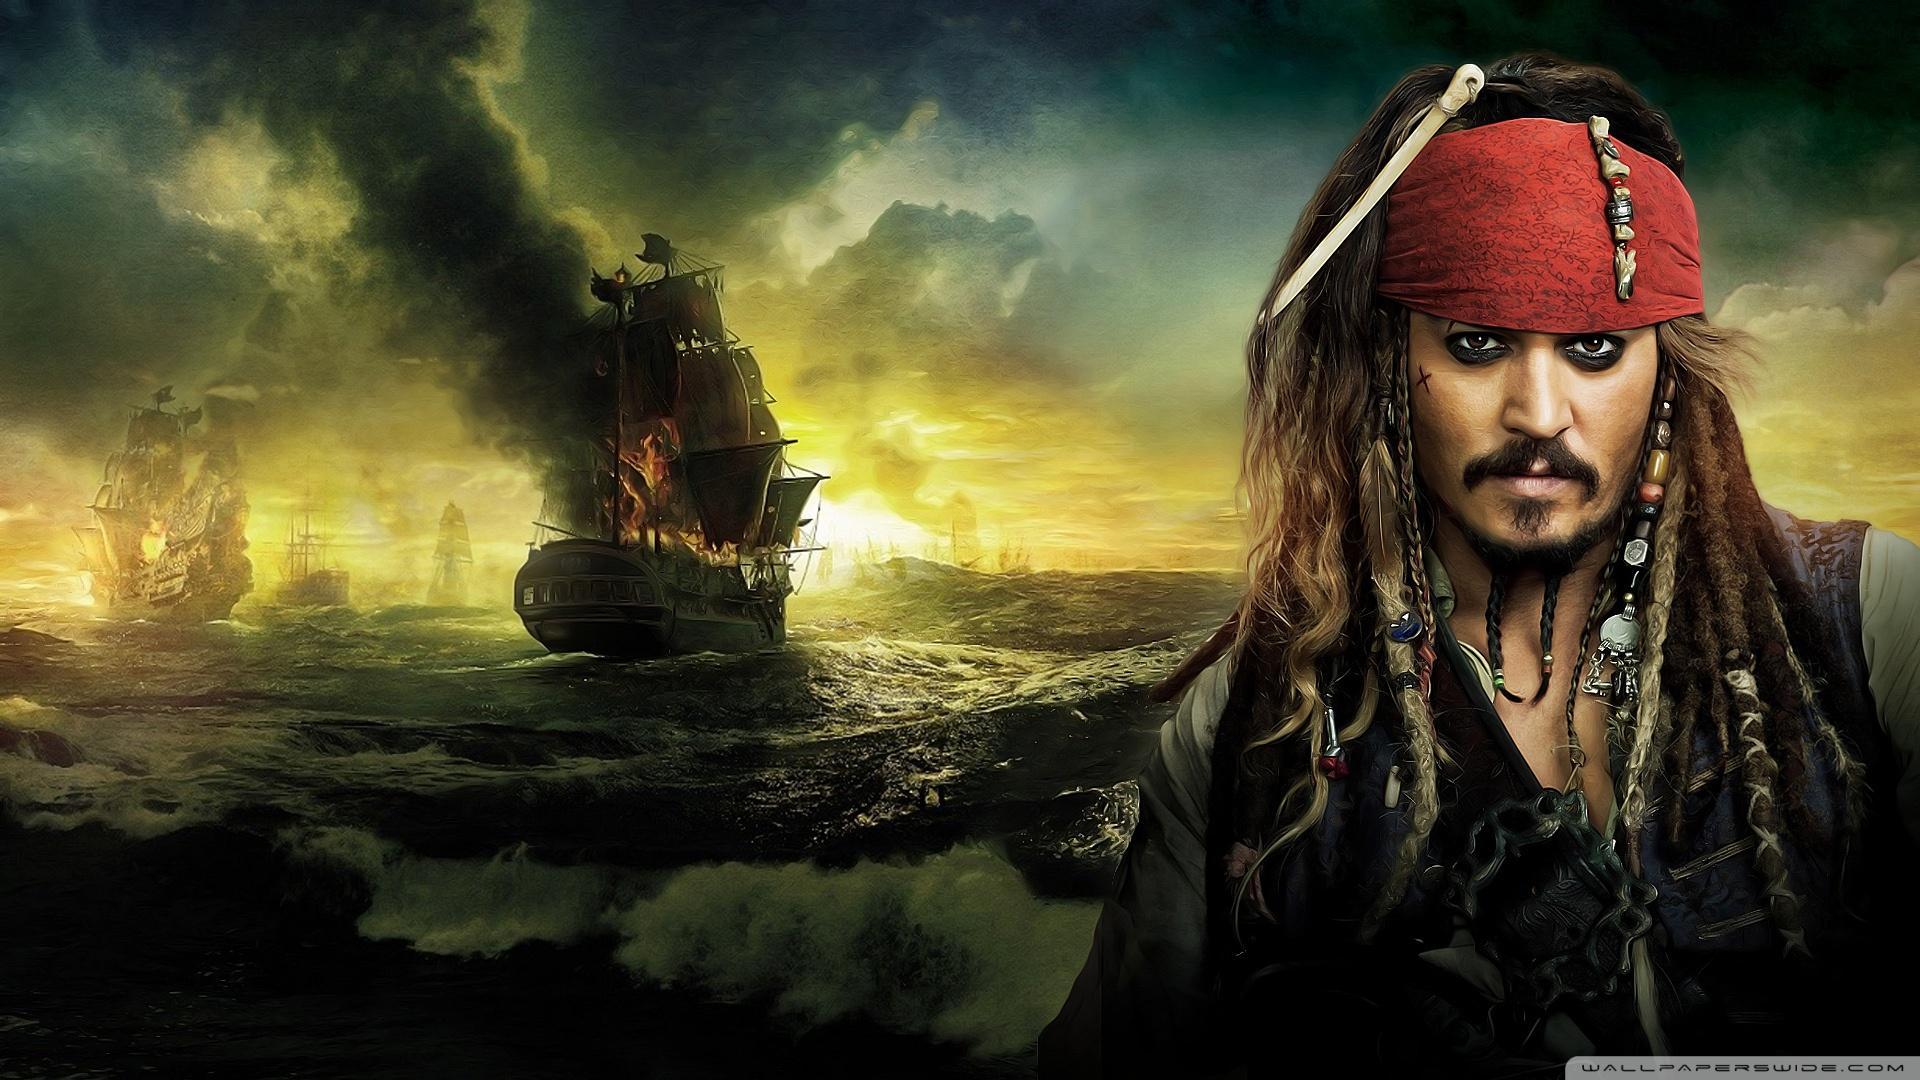 Free Pirates Of The Caribbean Wallpaper Downloads 100 Pirates Of The Caribbean  Wallpapers for FREE  Wallpaperscom